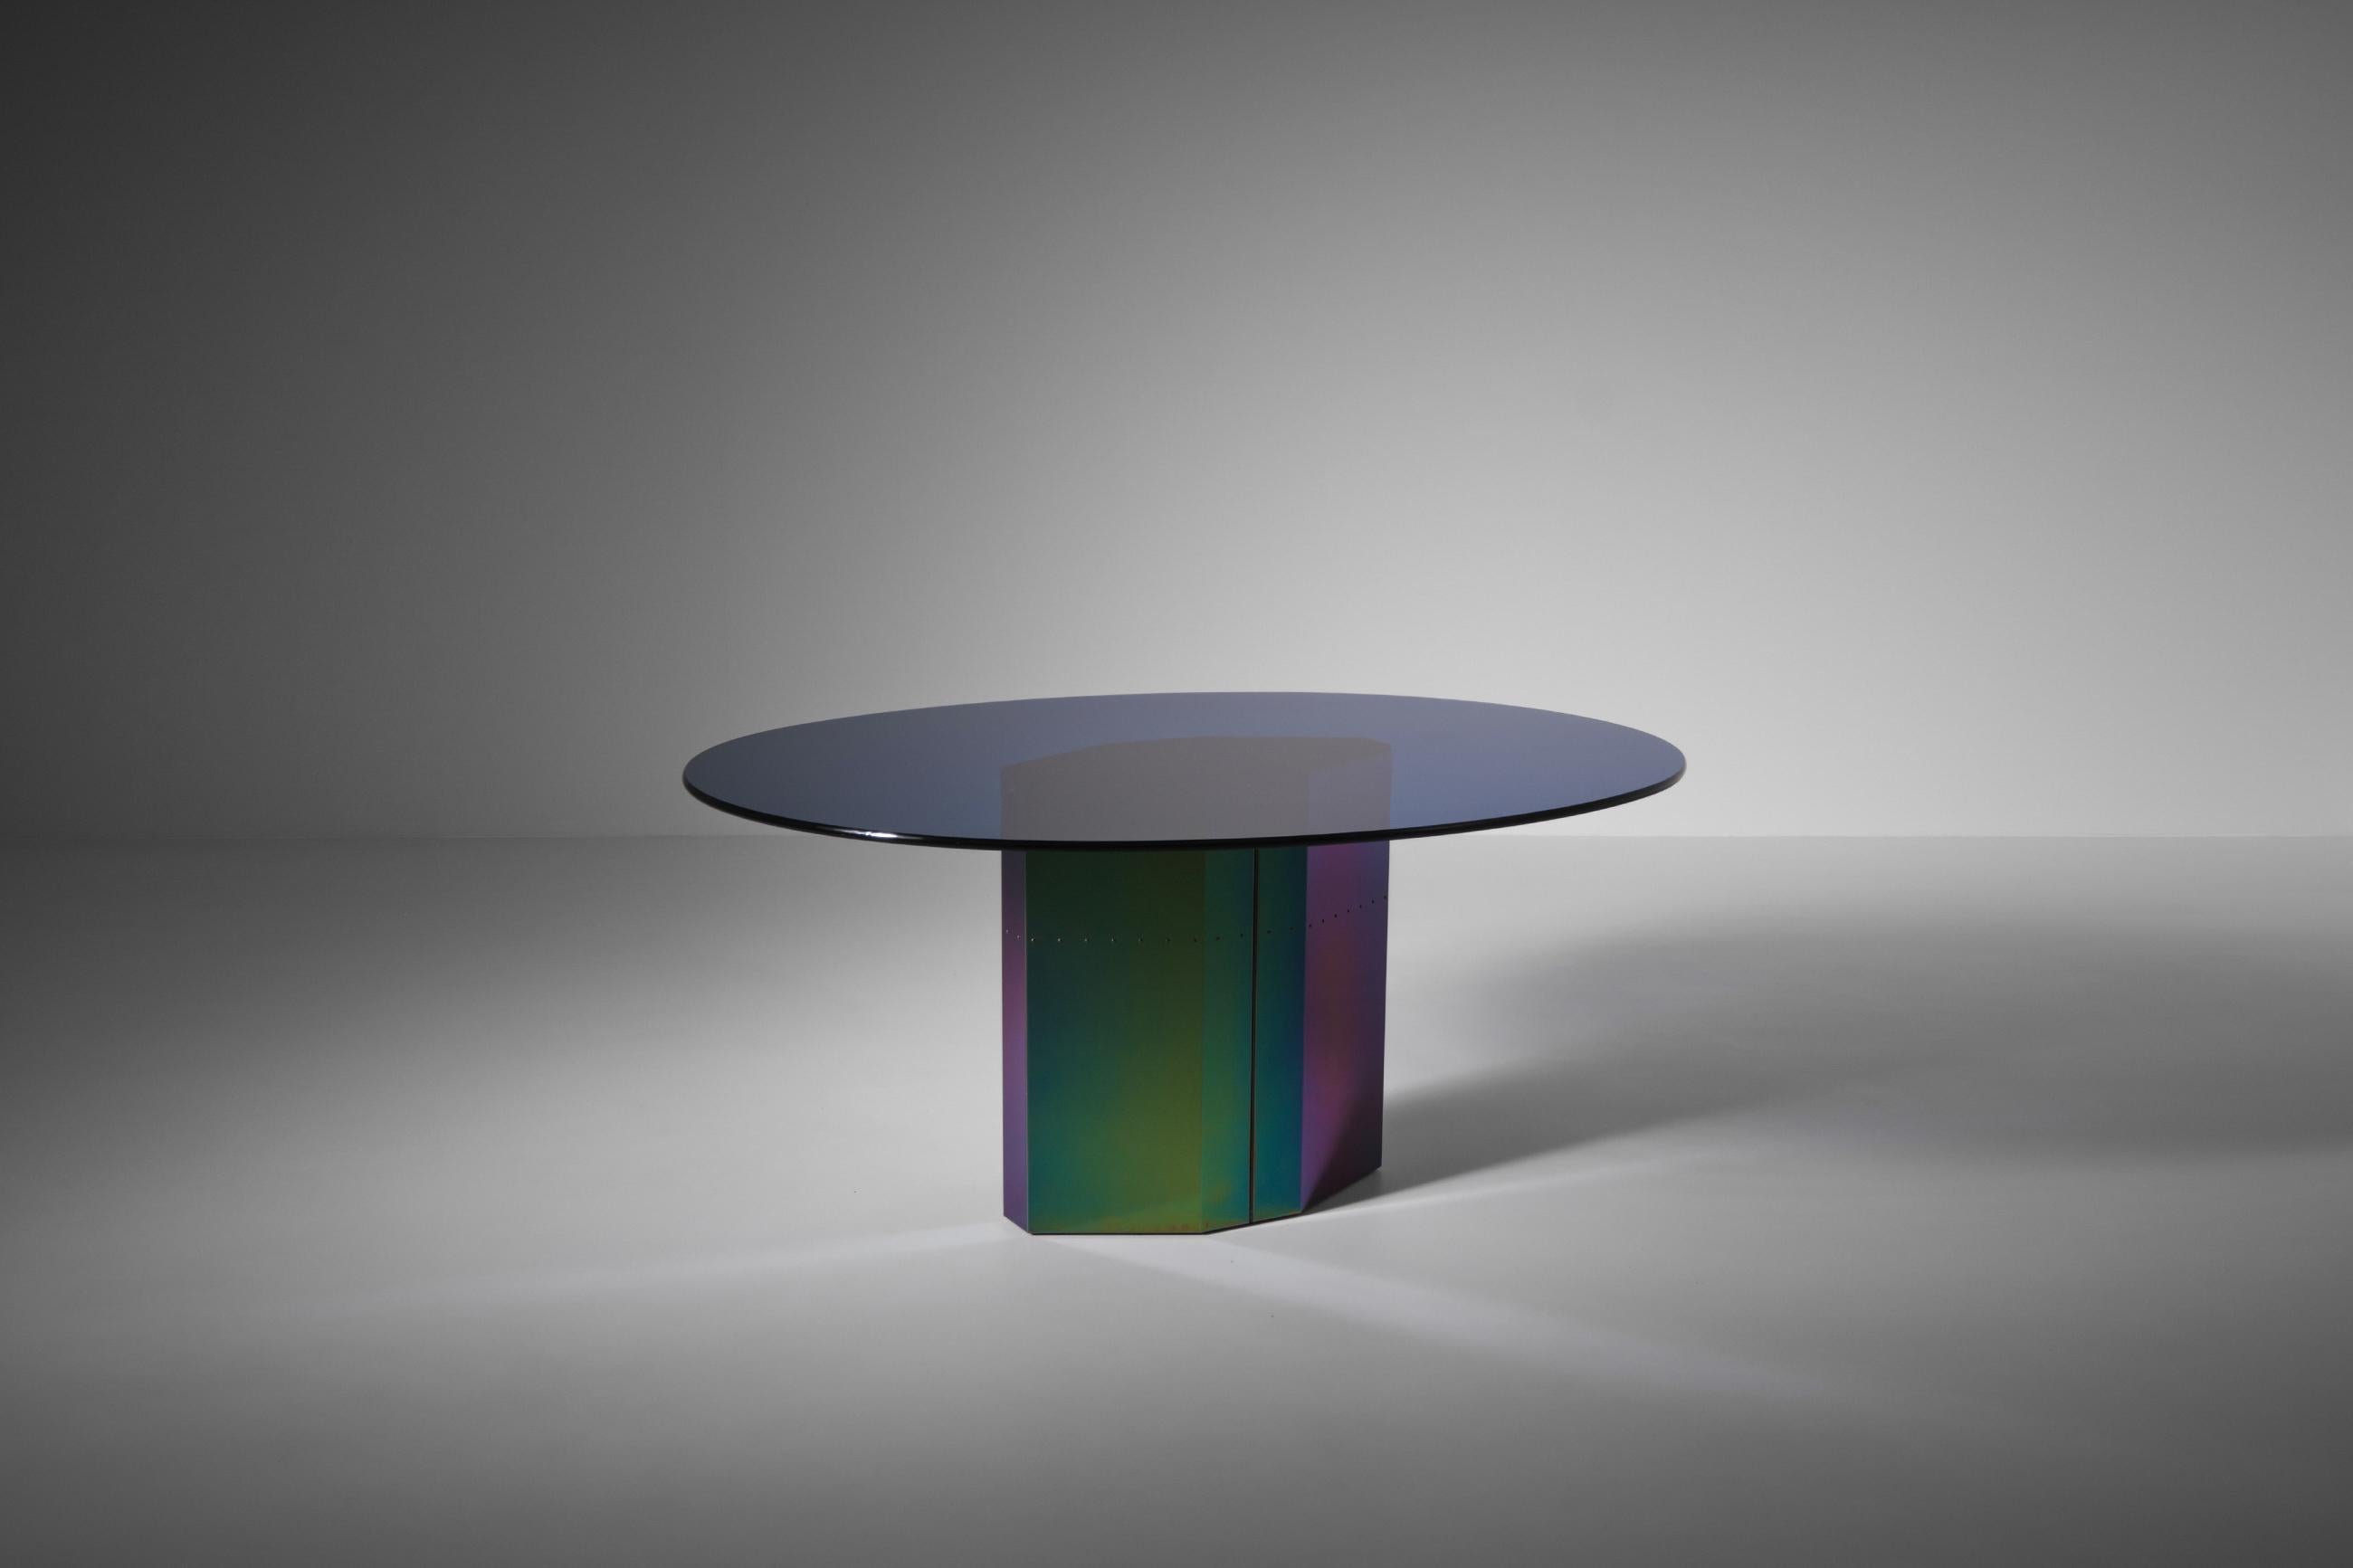 Rare and exceptional dining table mod. ‘Polygonon’ by Afra & Tobia Scarpa for B&B Italia, Italy 1984. The fantastic base is made from electro coated stainless sheets with an iridescent finish which shifts into different colors; from blue to green to